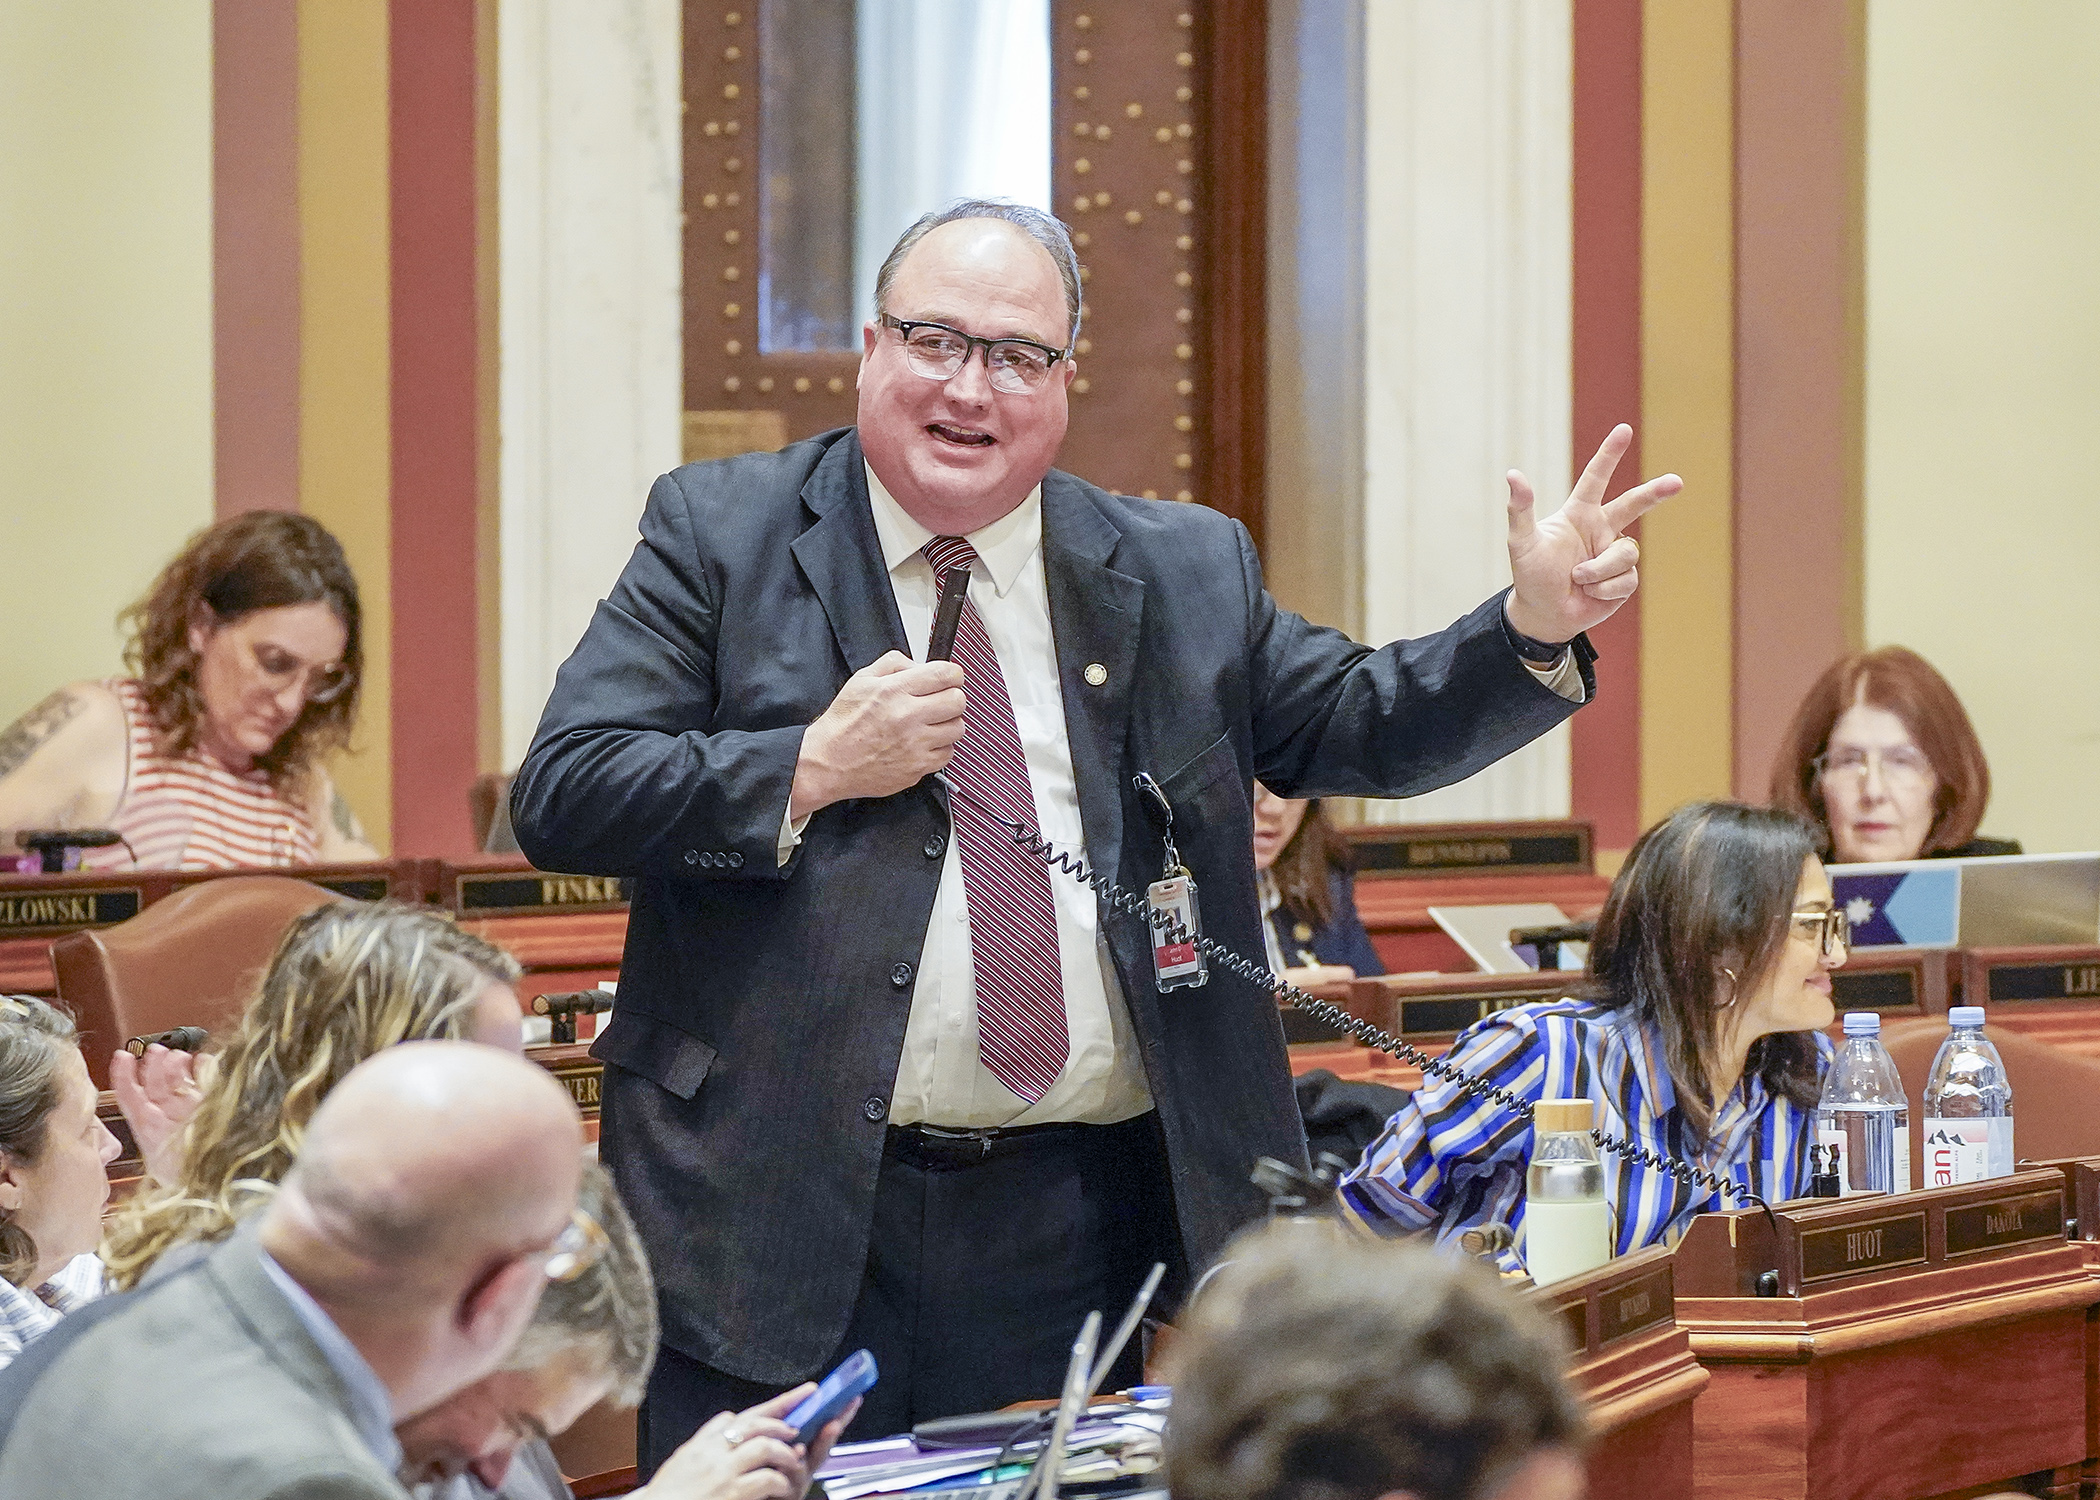 Rep. John Huot introduces HF4738 on the House Floor May 7. The bill would establish an Office of Emergency Medical Services. (Photo by Andrew VonBank)